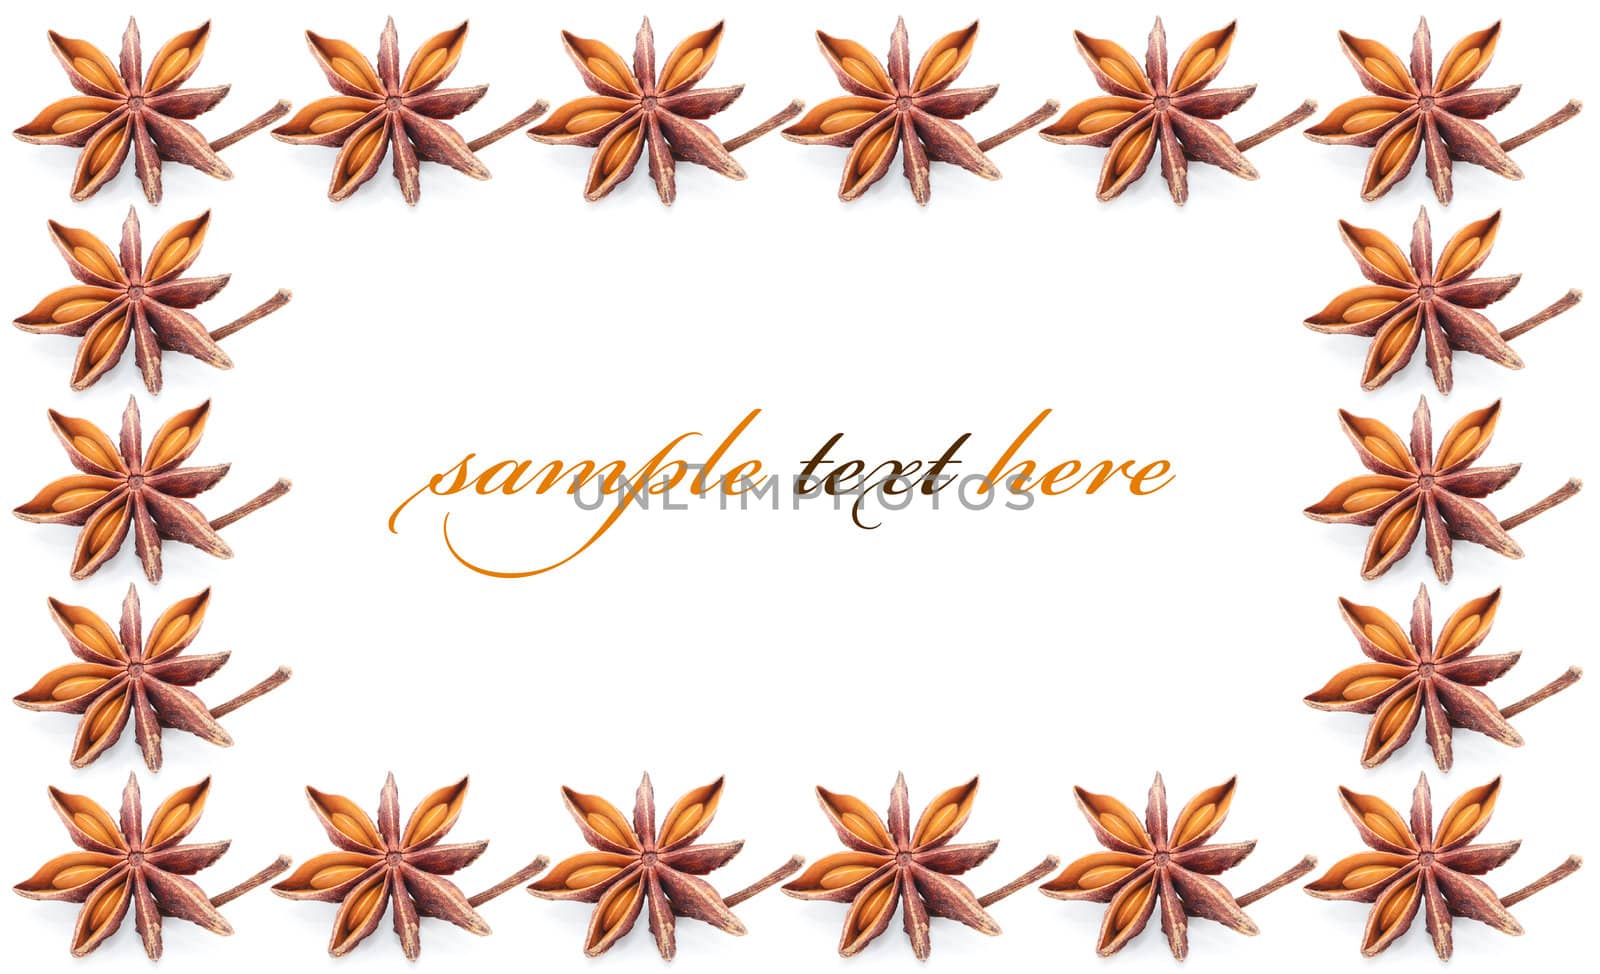 Frame from anise on white background with saple text